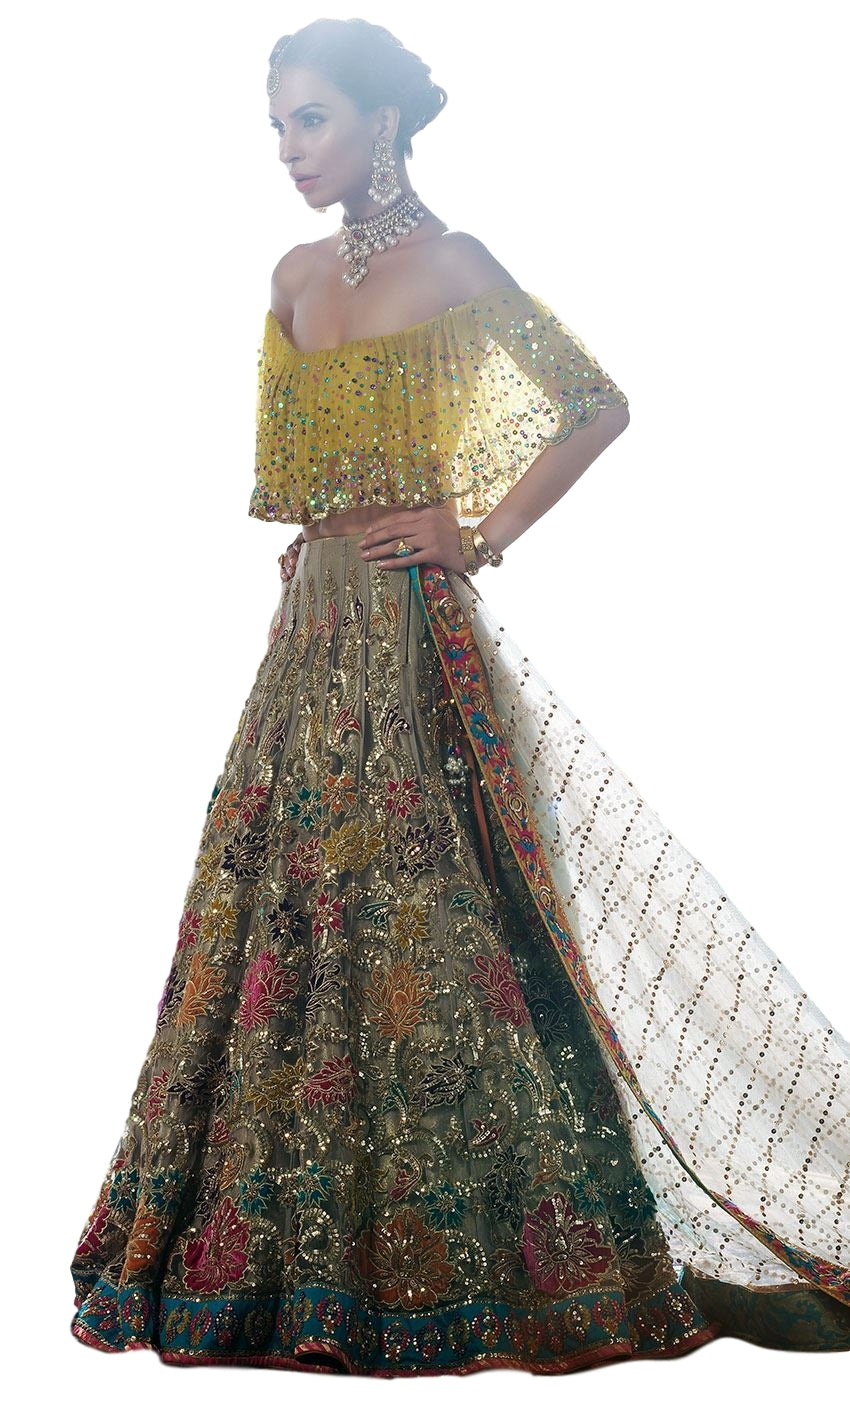 Fawn Color Wedding Lehenga With Multicolor Embroidery Panache Haute Couture 